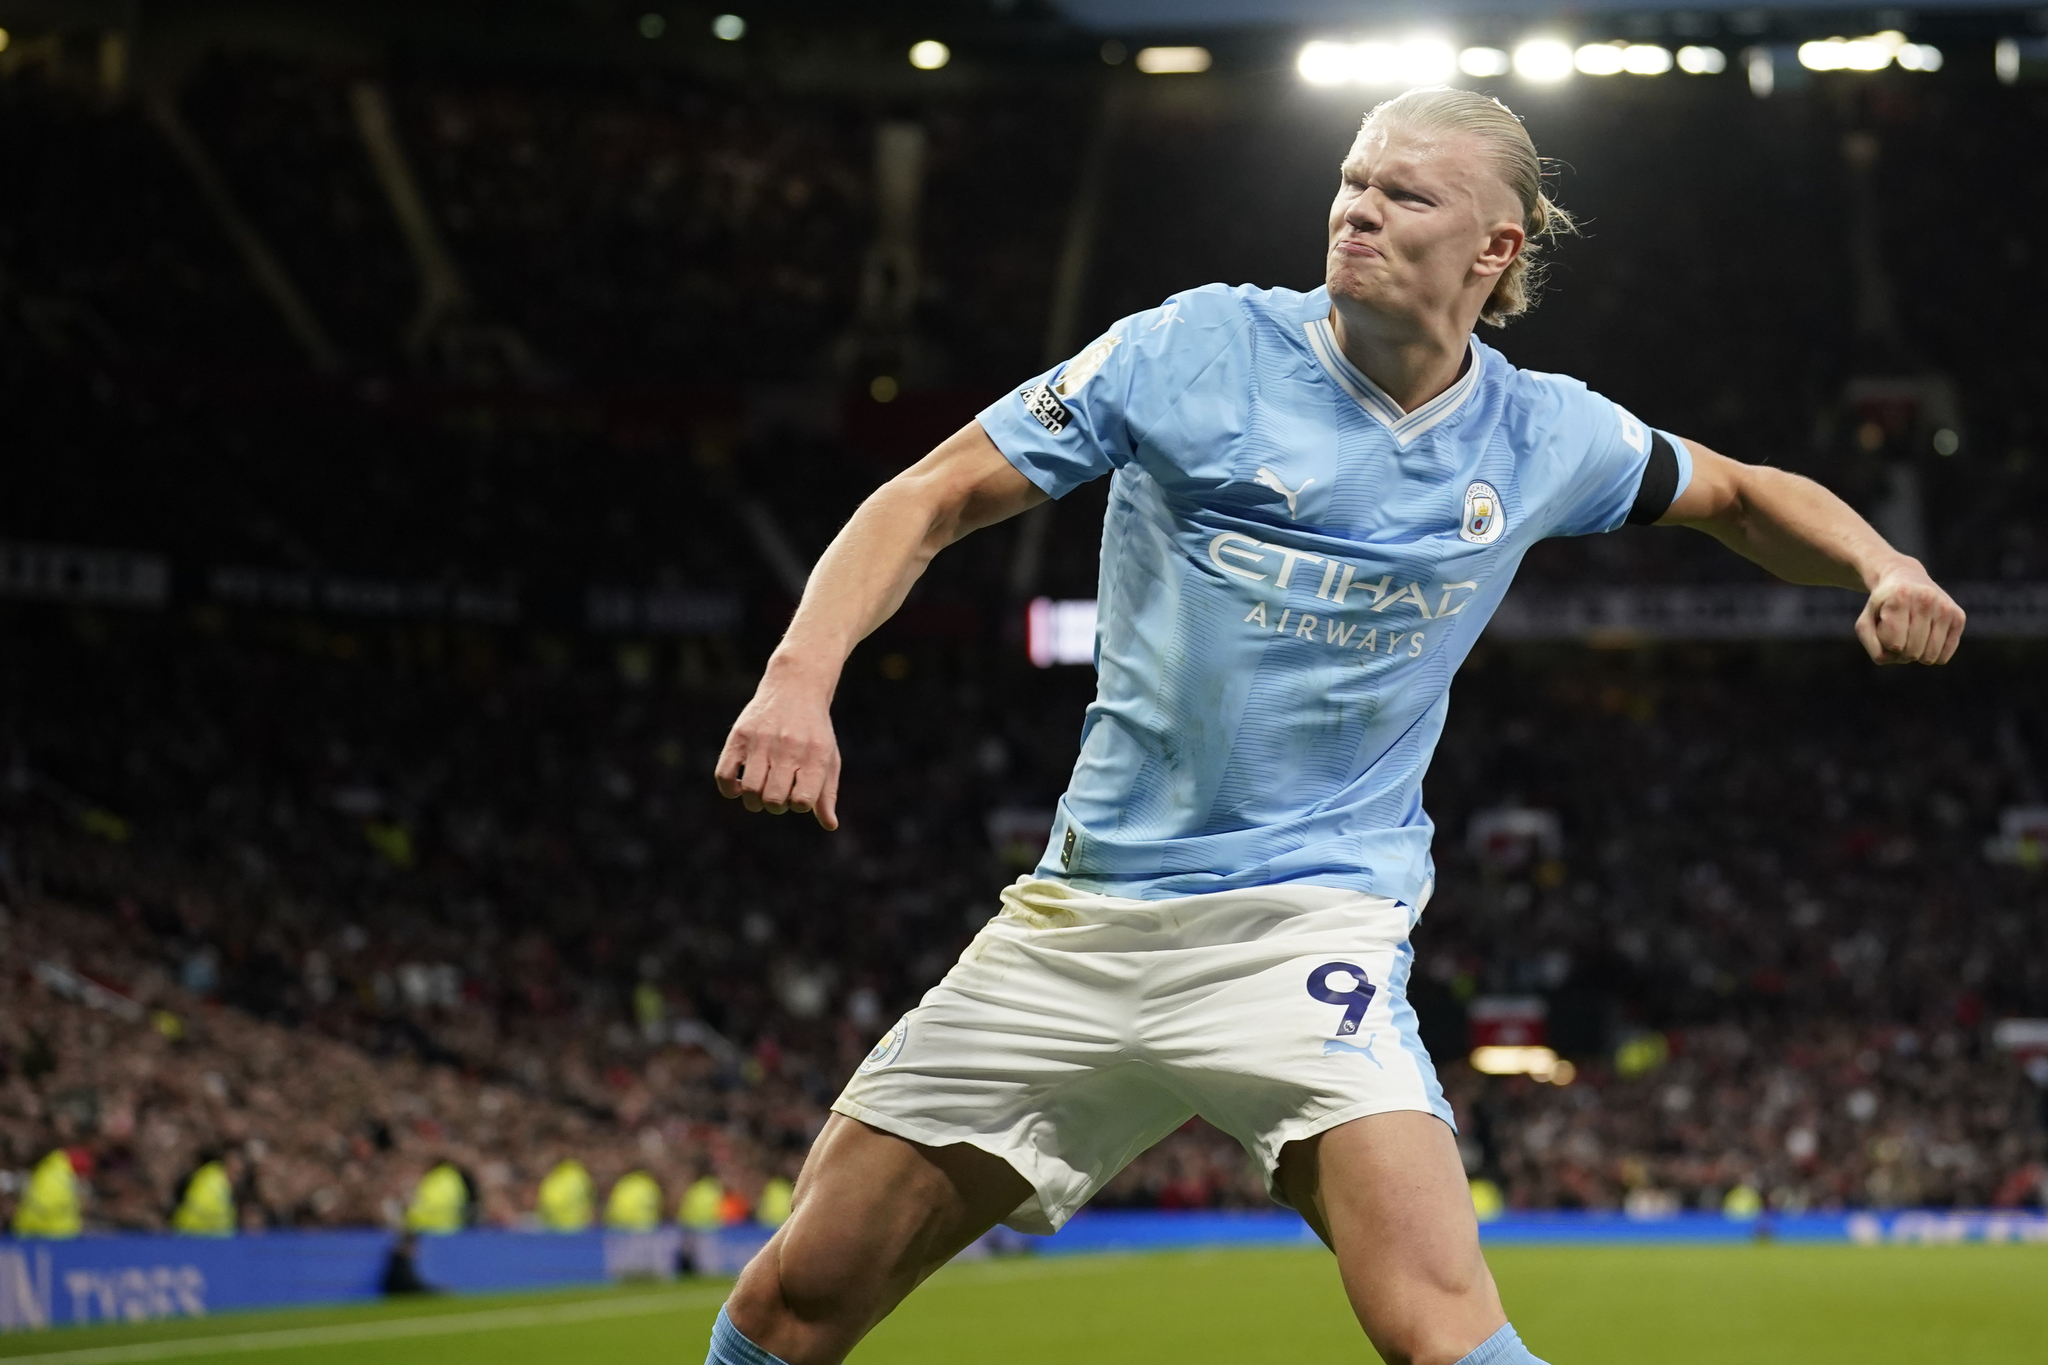 Manchester City's Erling Haaland celebrates after scoring the opening goal